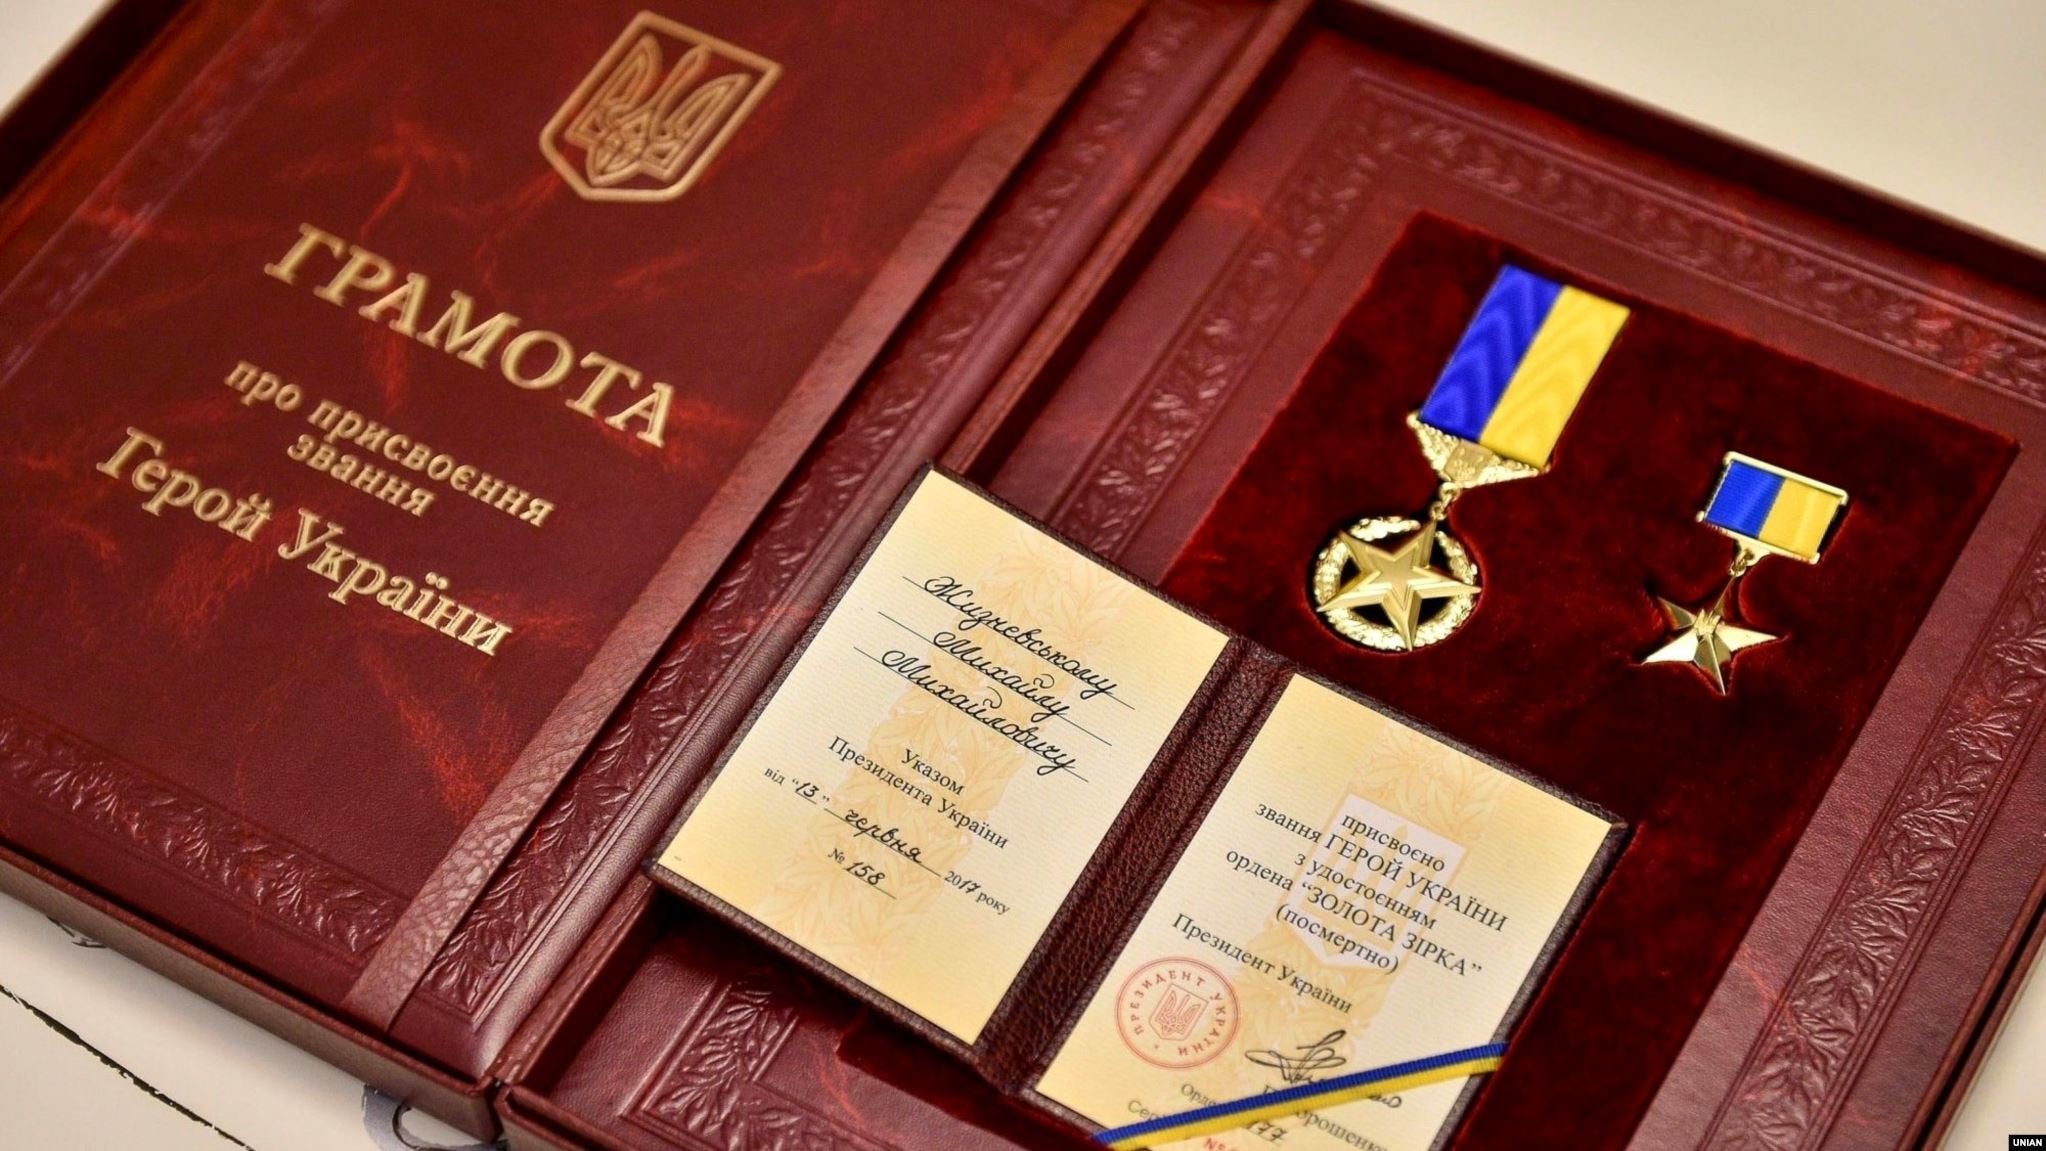 Our highest honor: Top medals from countries around the world